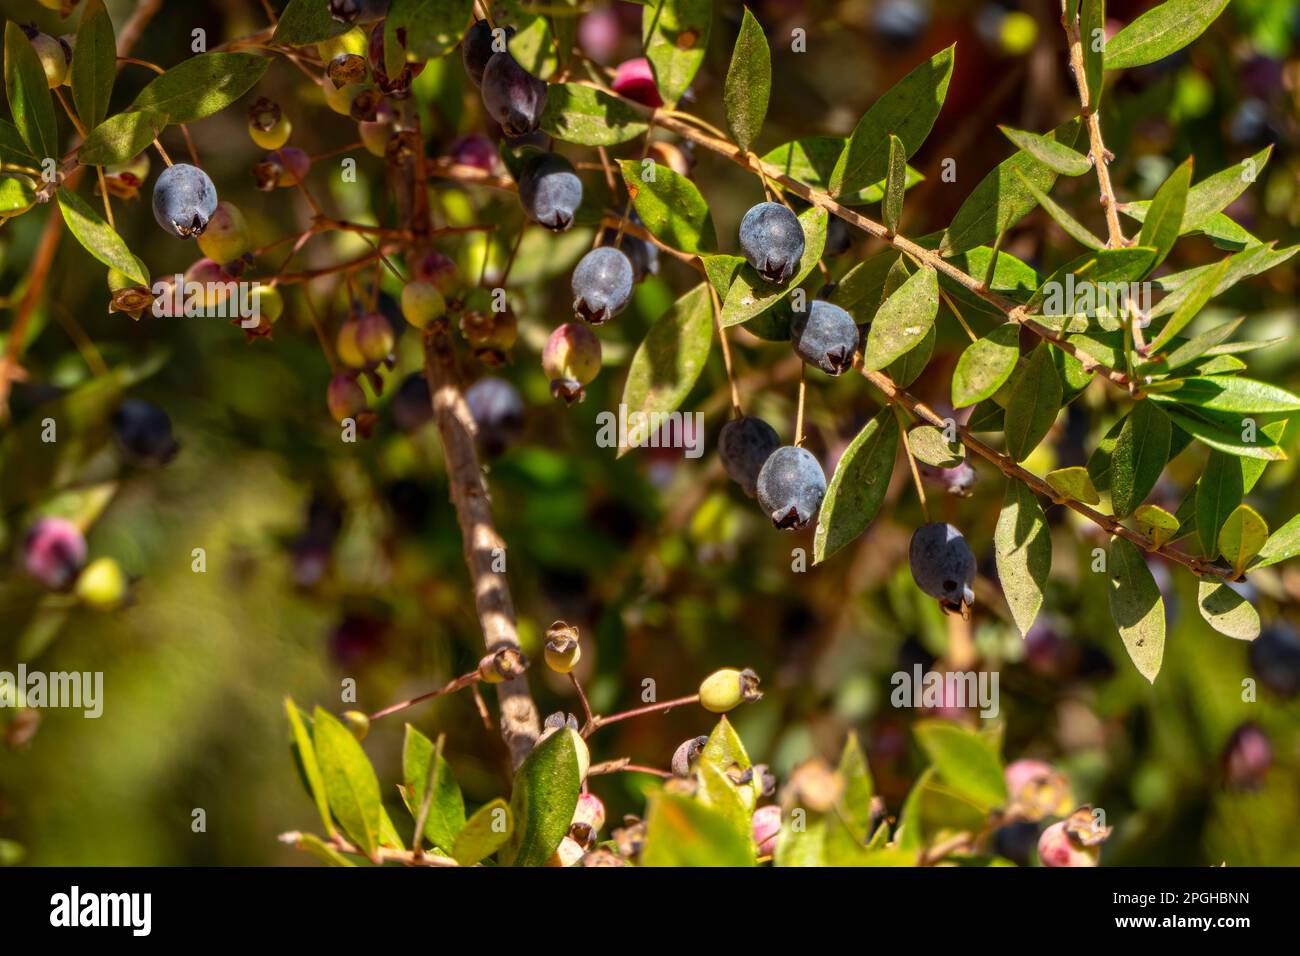 Blue Myrtus communis berries close up on the blurred background Stock Photo